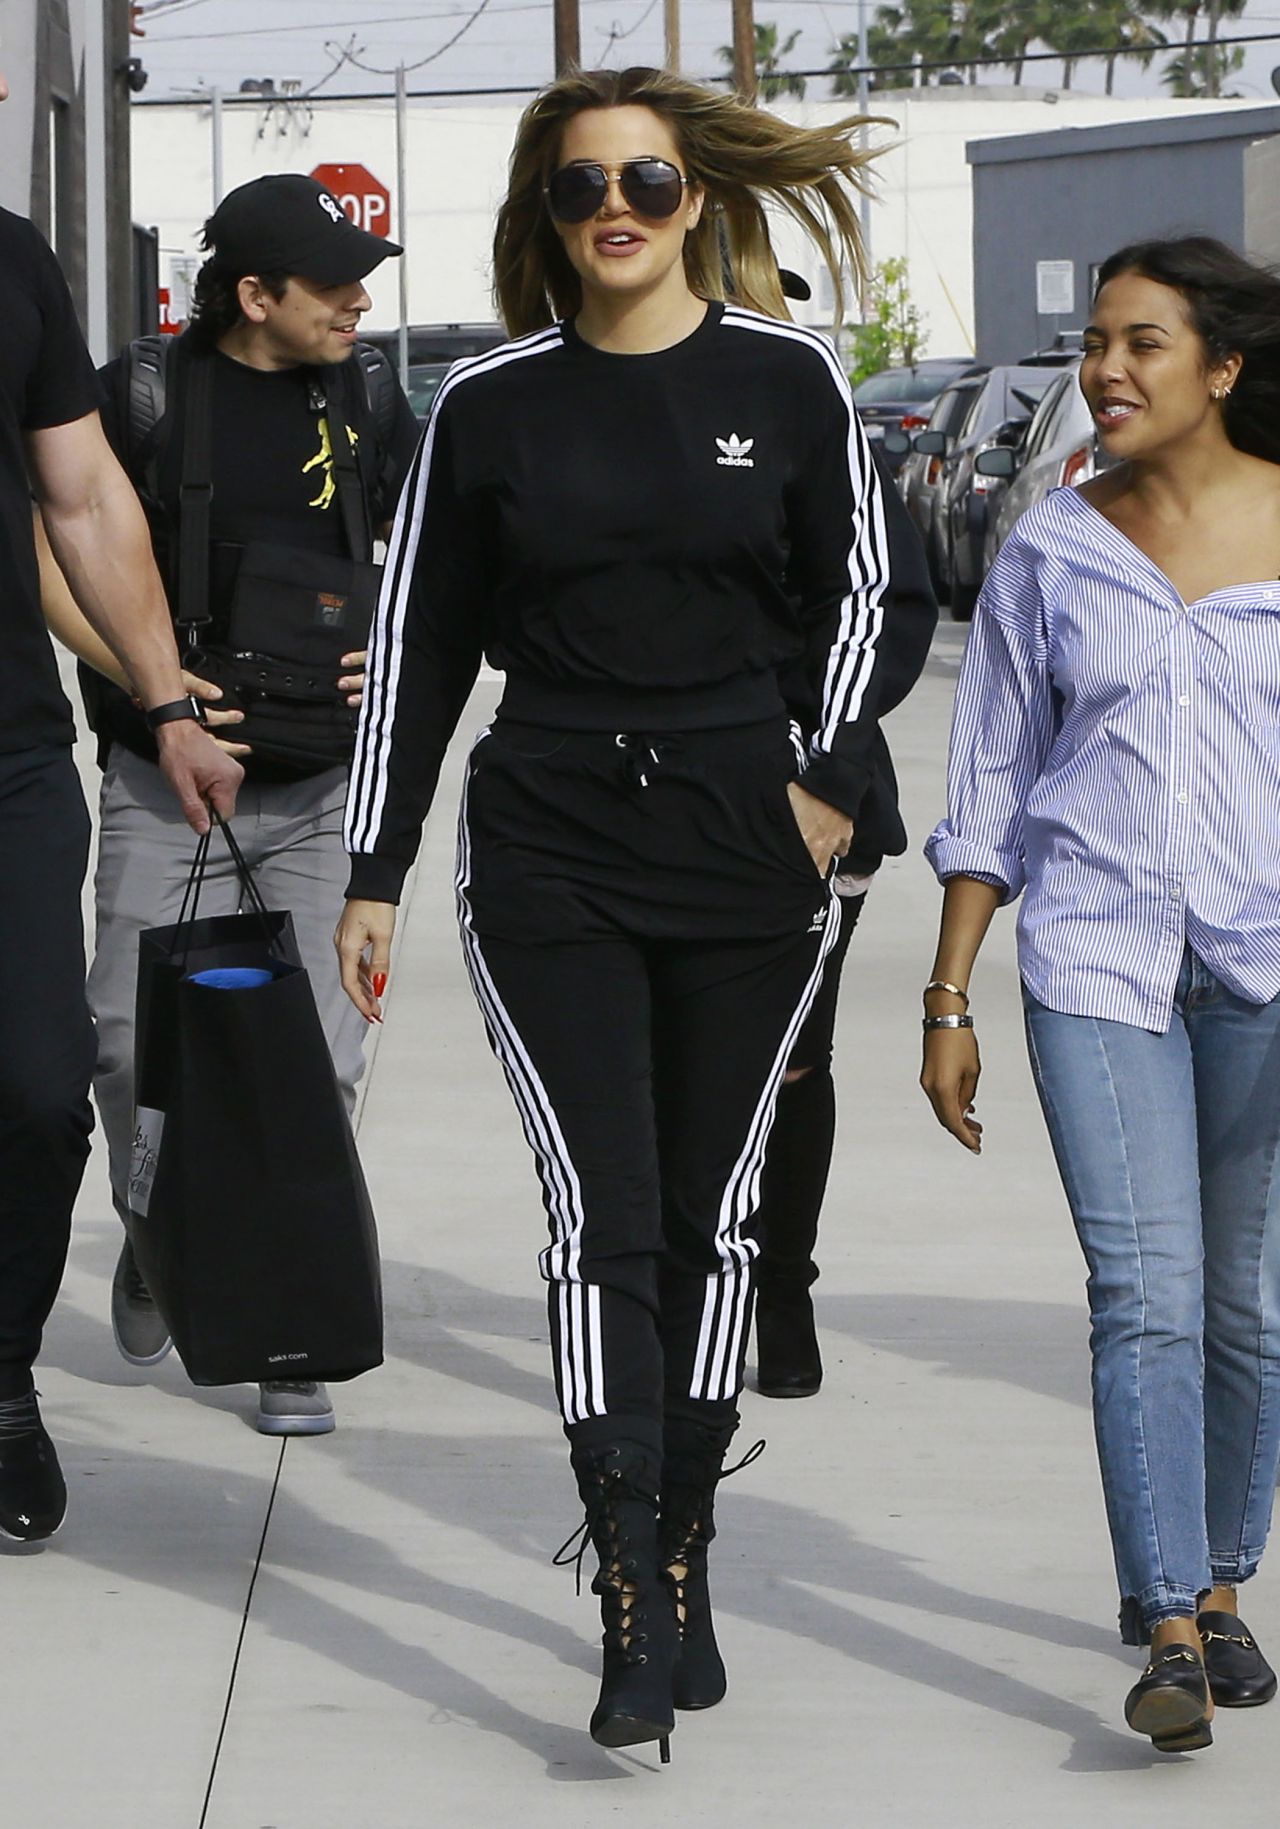 Khloe Kardashian at the Studio Filming For her TV Show - Culver City 4 ...